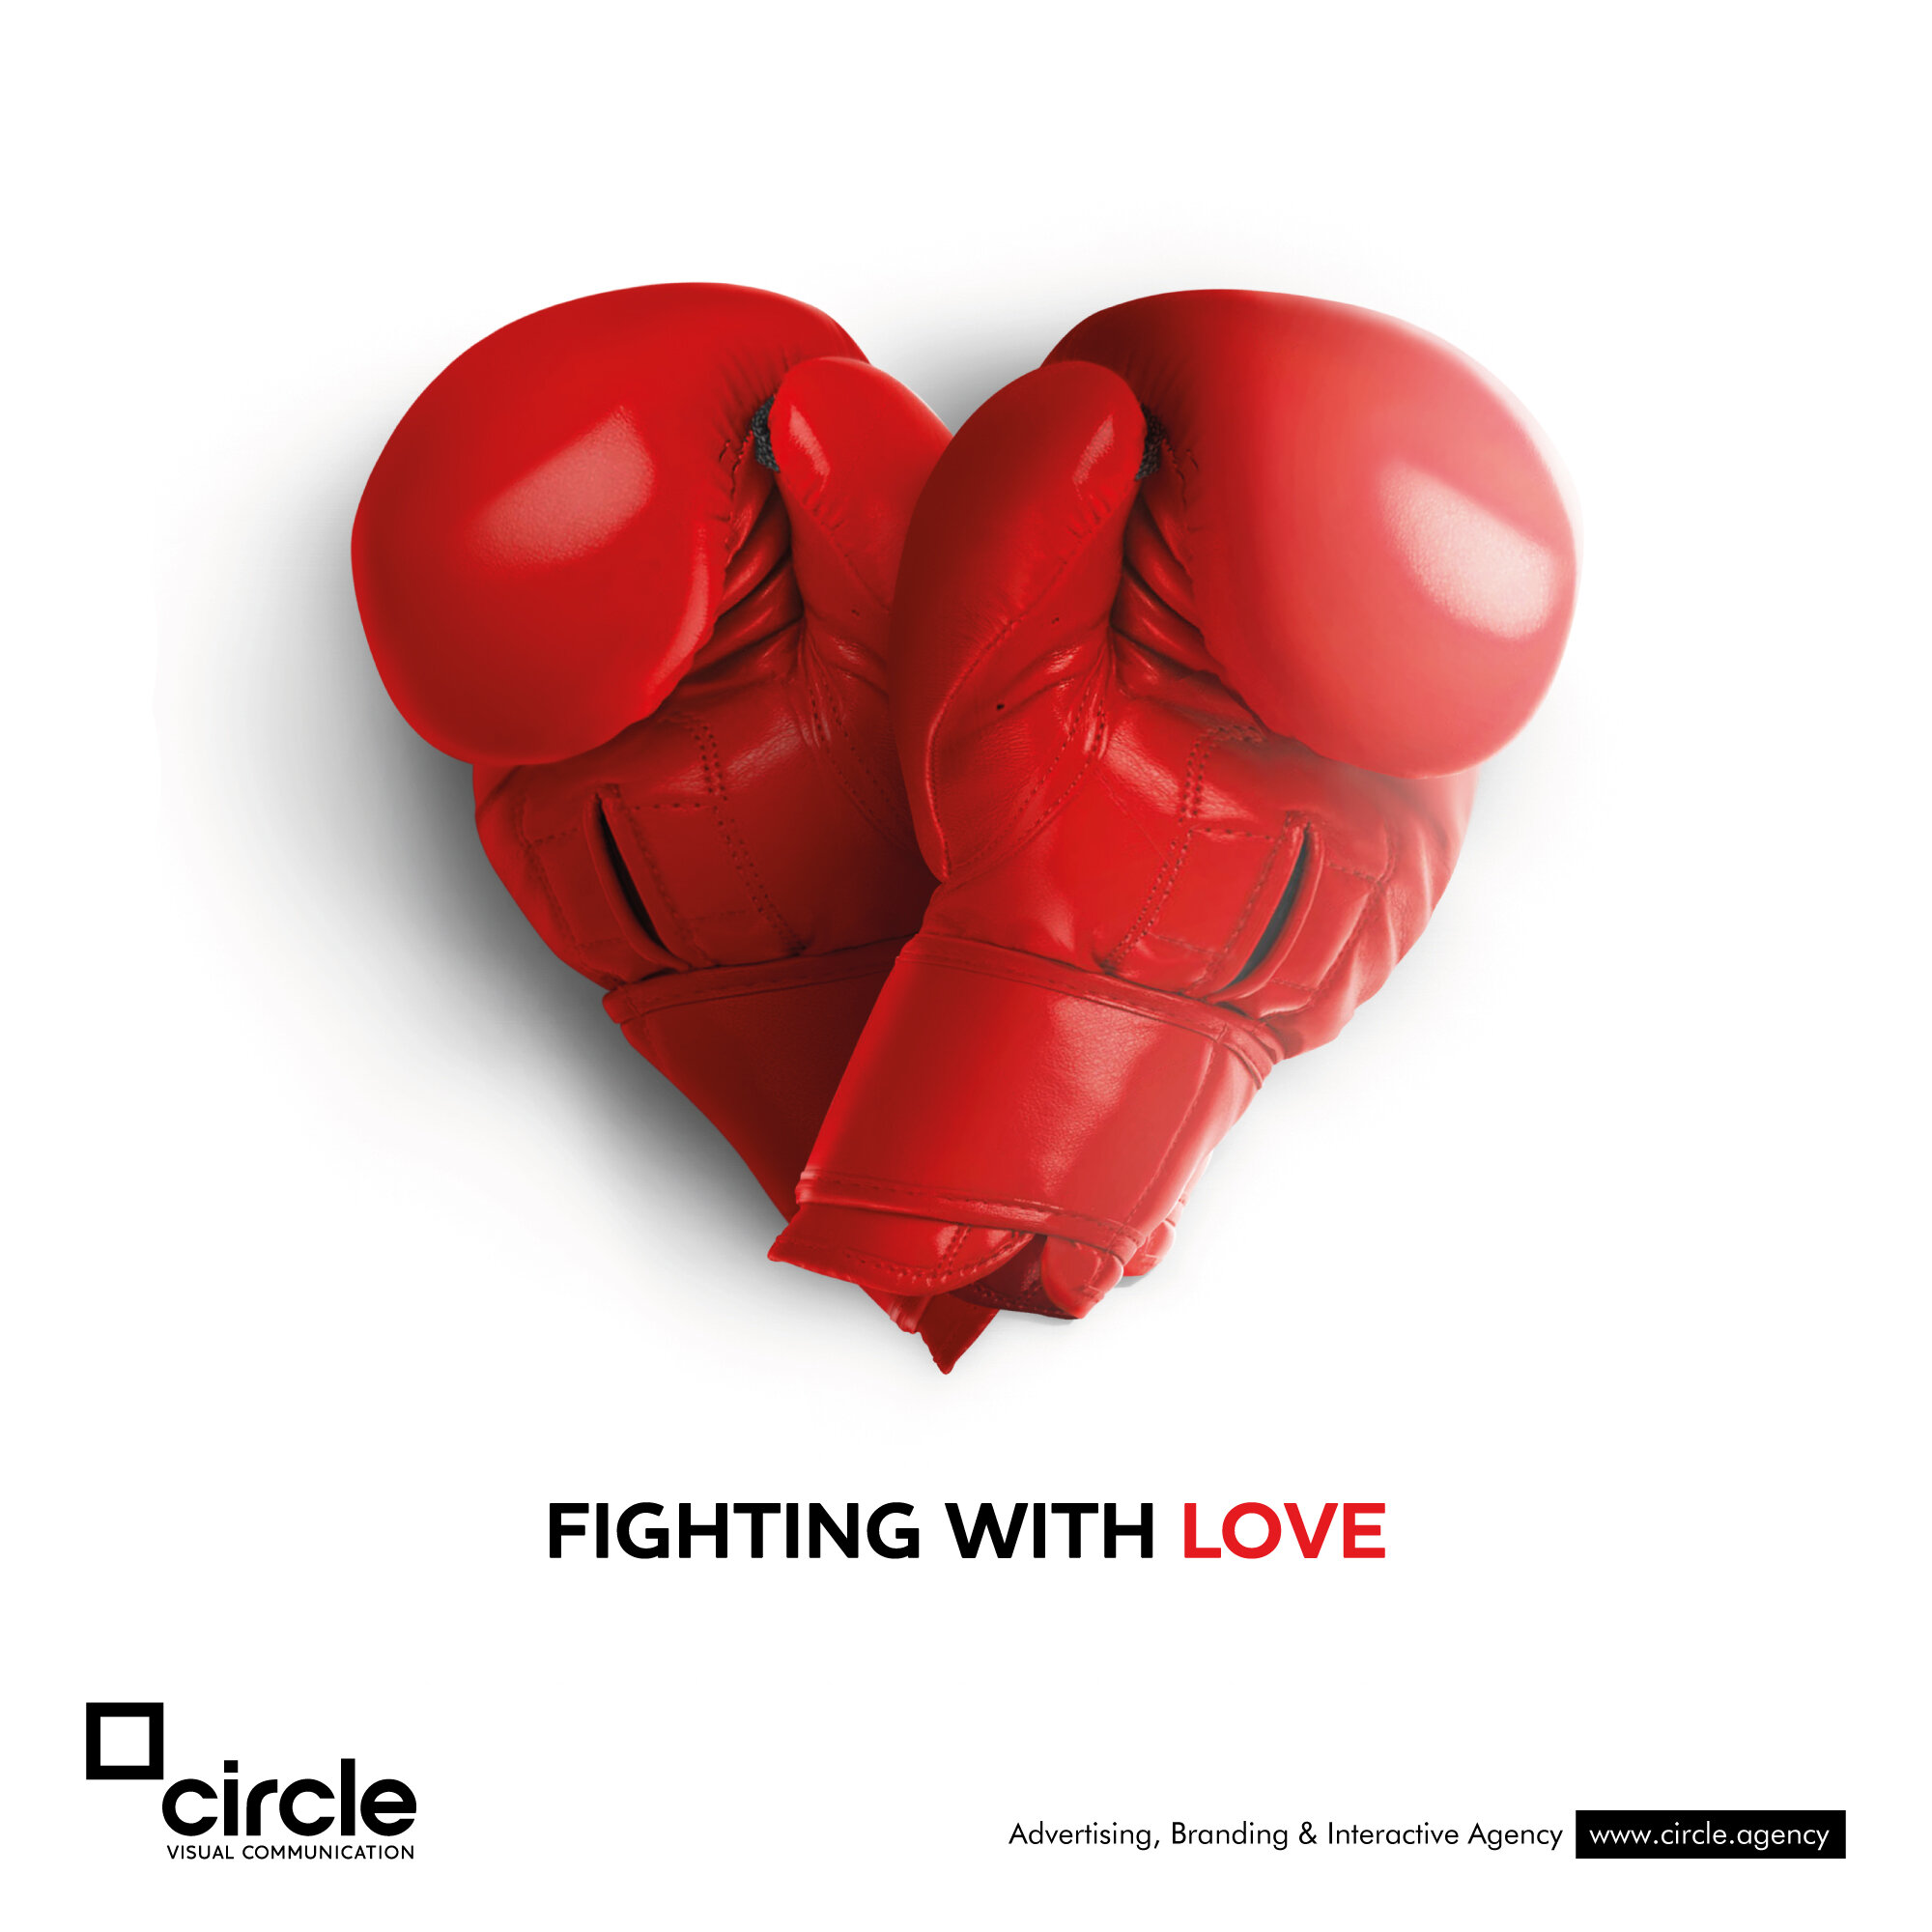 fighting_with_love_red_heart_punch_gloves_instagram_post_circle_visual_communication_square_shap_creative_branding_social_media_SM_digital_online_agency_design_house.jpg